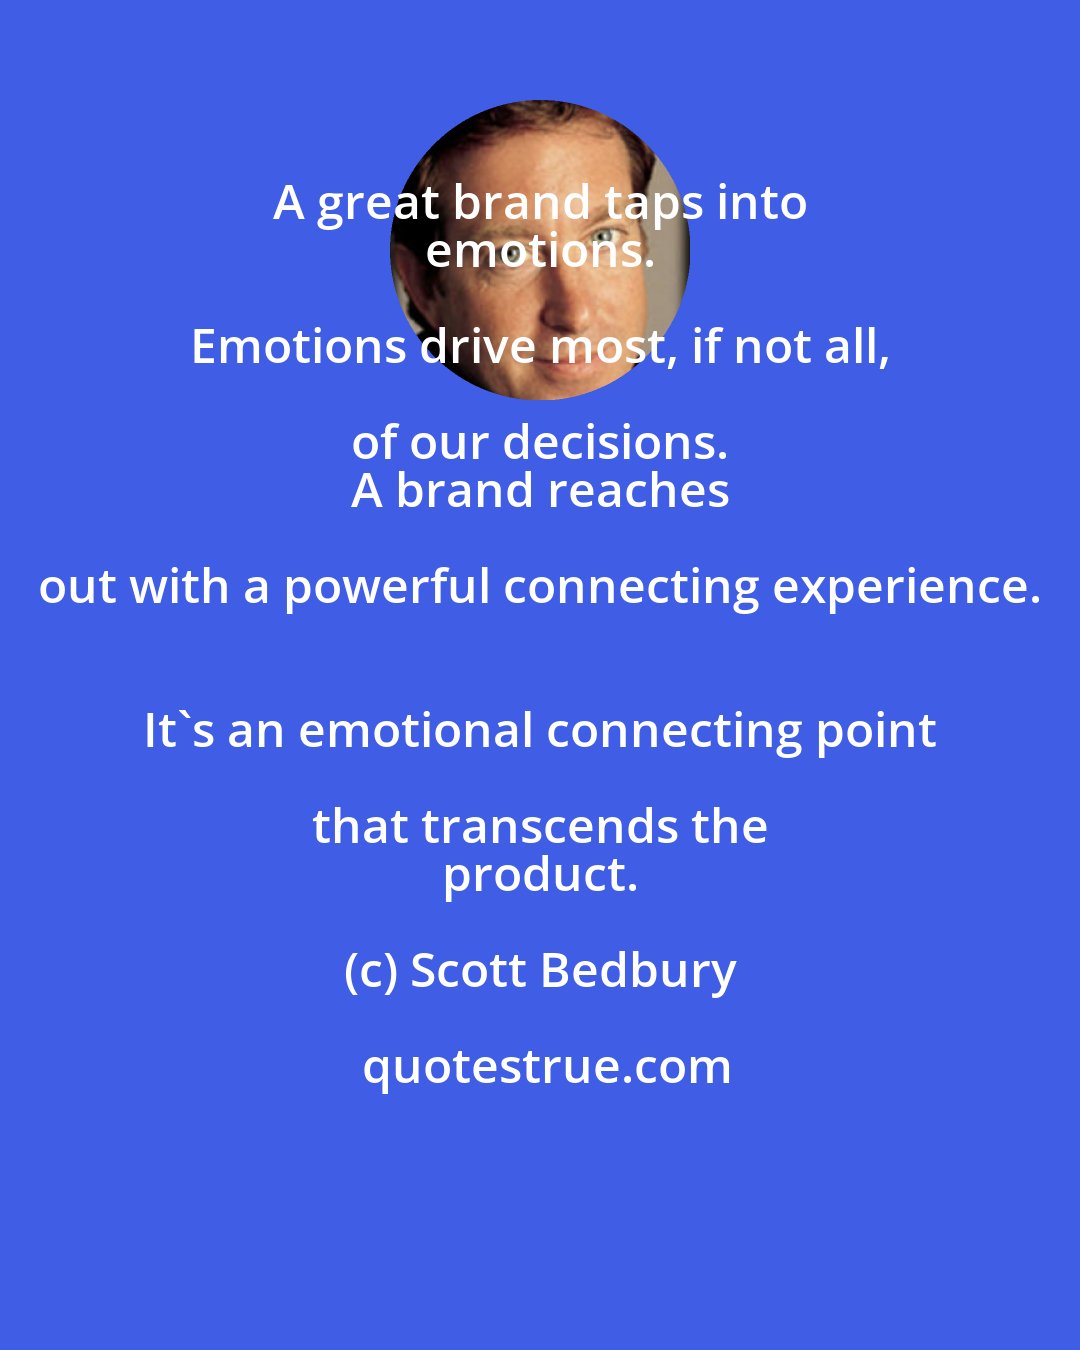 Scott Bedbury: A great brand taps into 
 emotions. Emotions drive most, if not all, of our decisions. 
 A brand reaches out with a powerful connecting experience. 
 It's an emotional connecting point that transcends the 
 product.